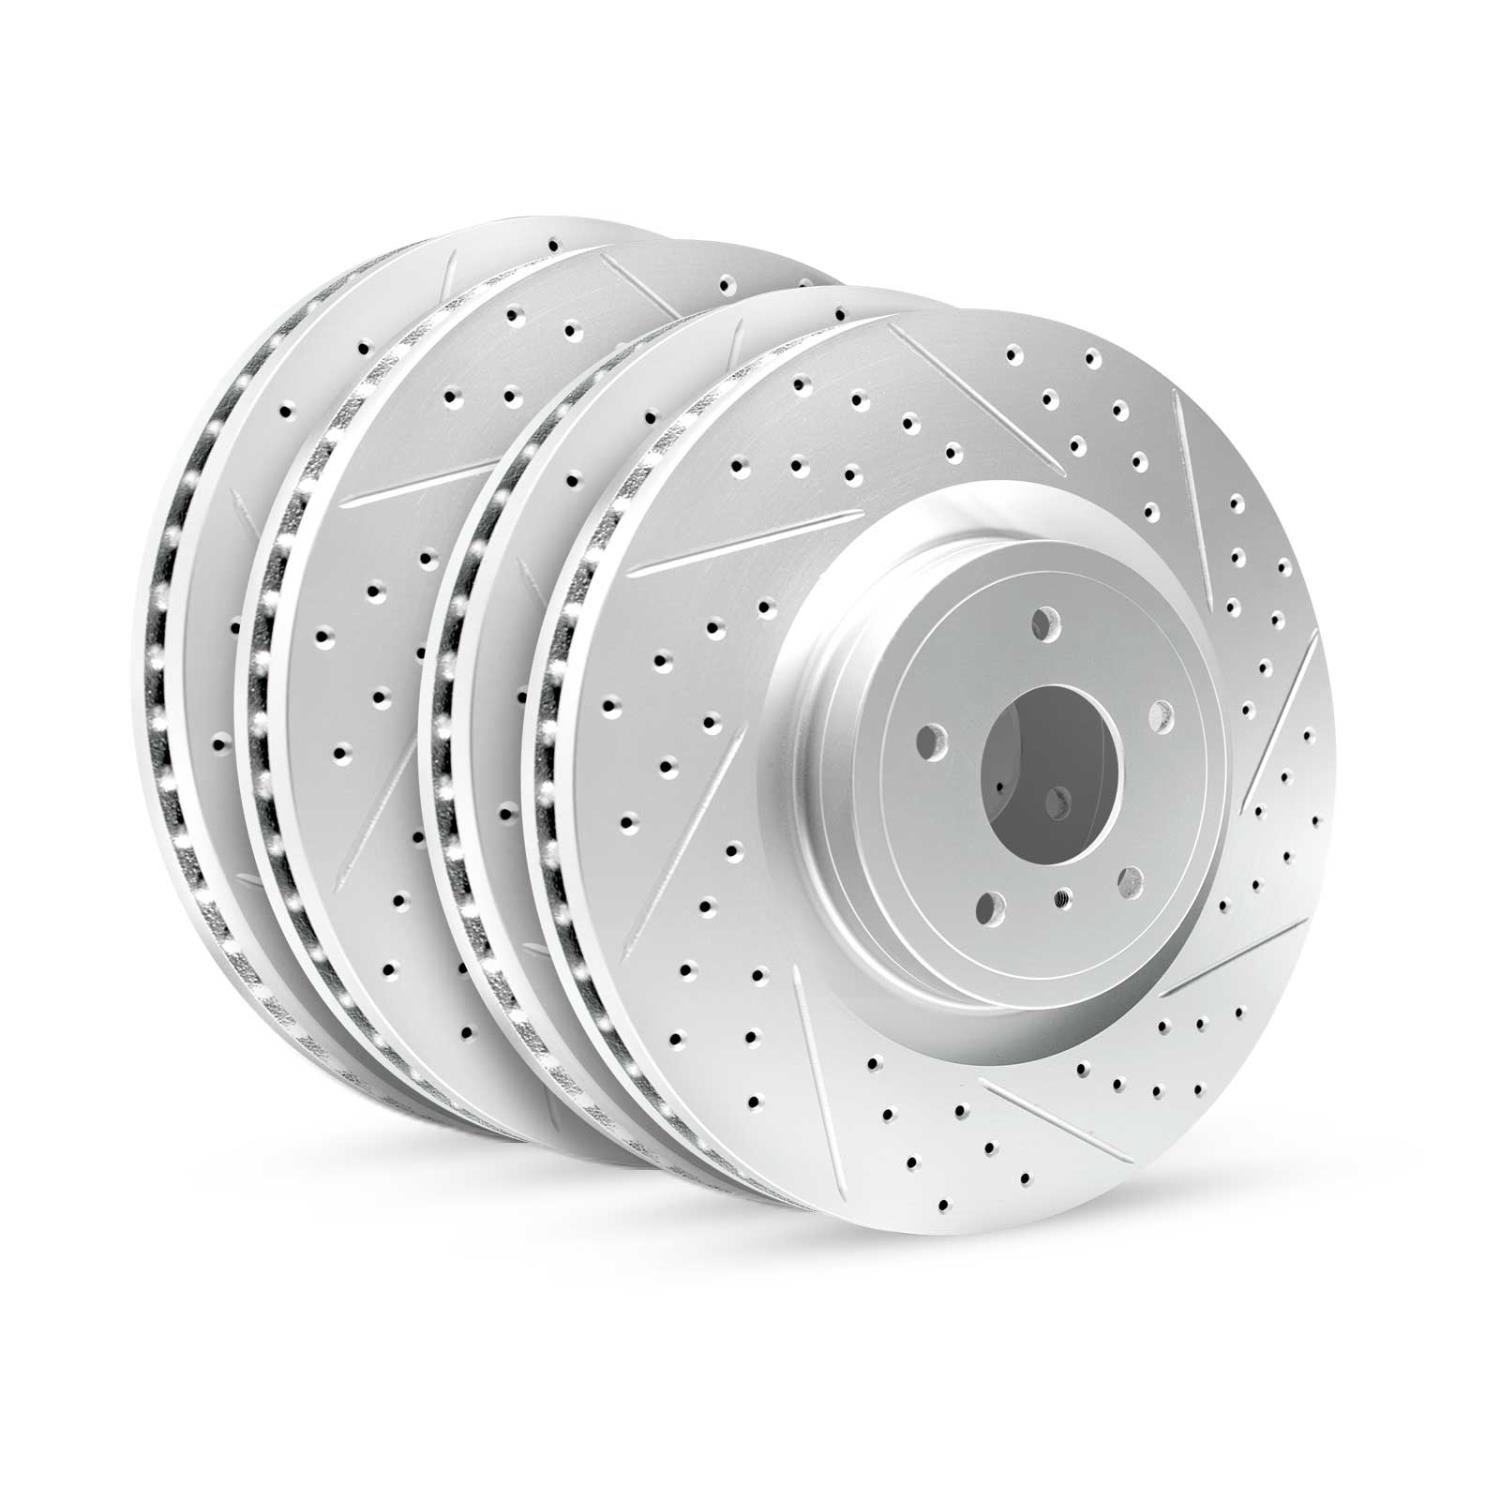 GEO-Carbon Drilled/Slotted Rotors, 2007-2015 Ford/Mazda,